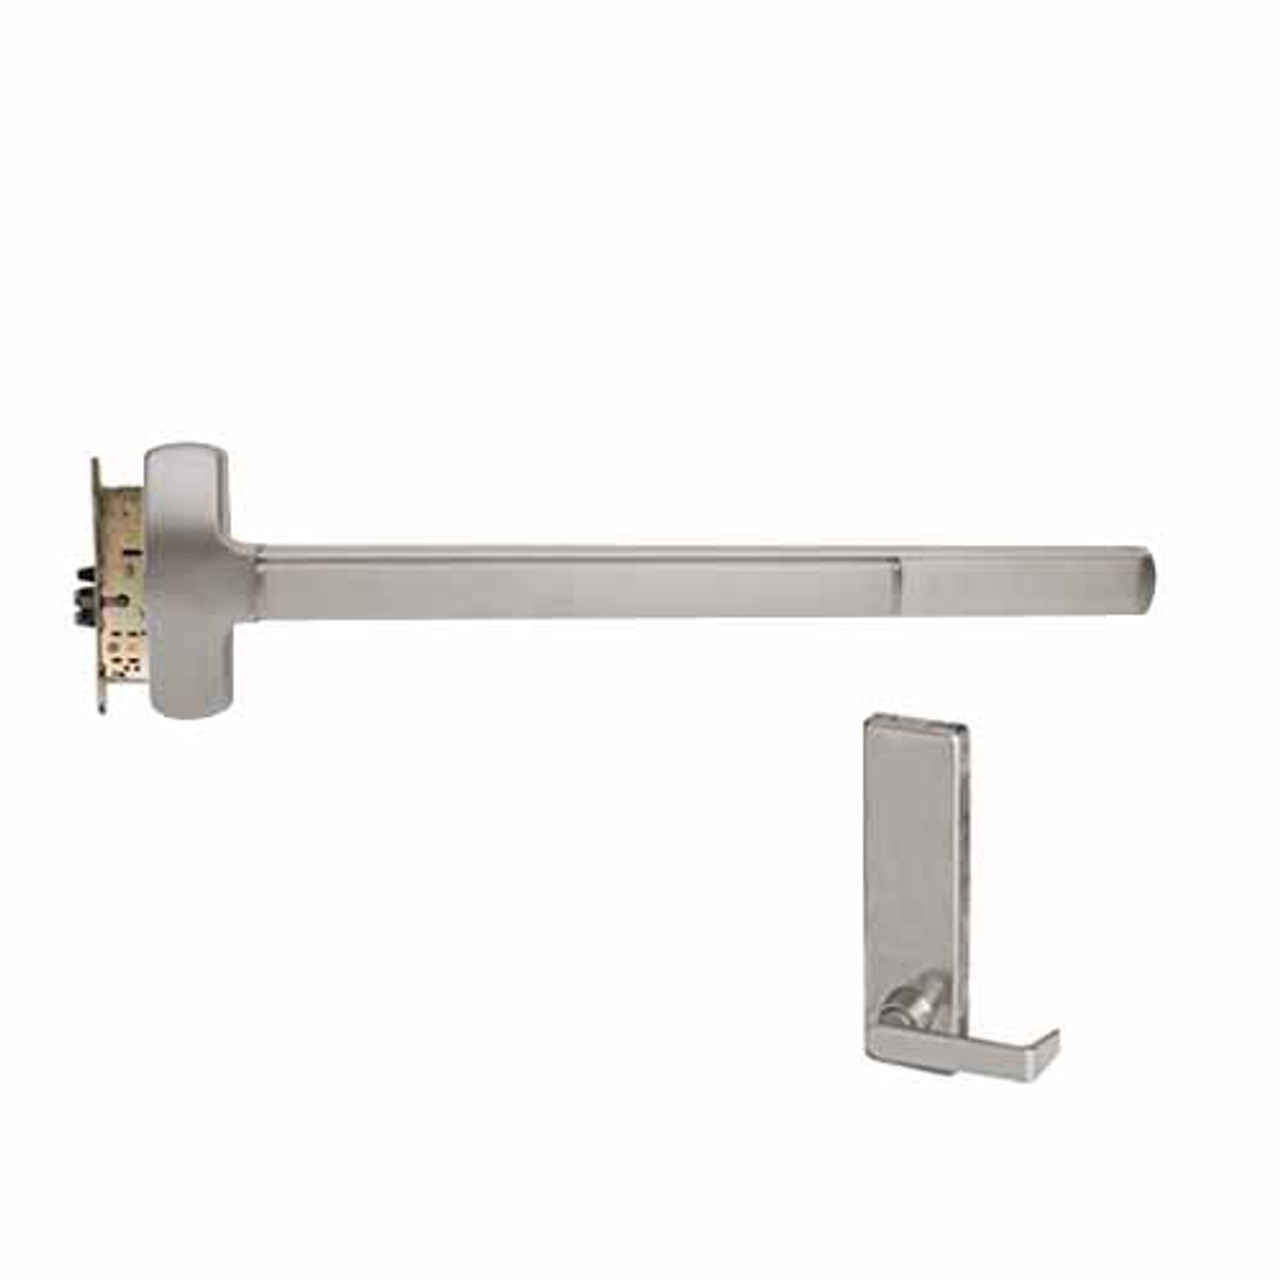 F-25-M-L-BE-Dane-US32D-3-LHR Falcon Exit Device in Satin Stainless Steel